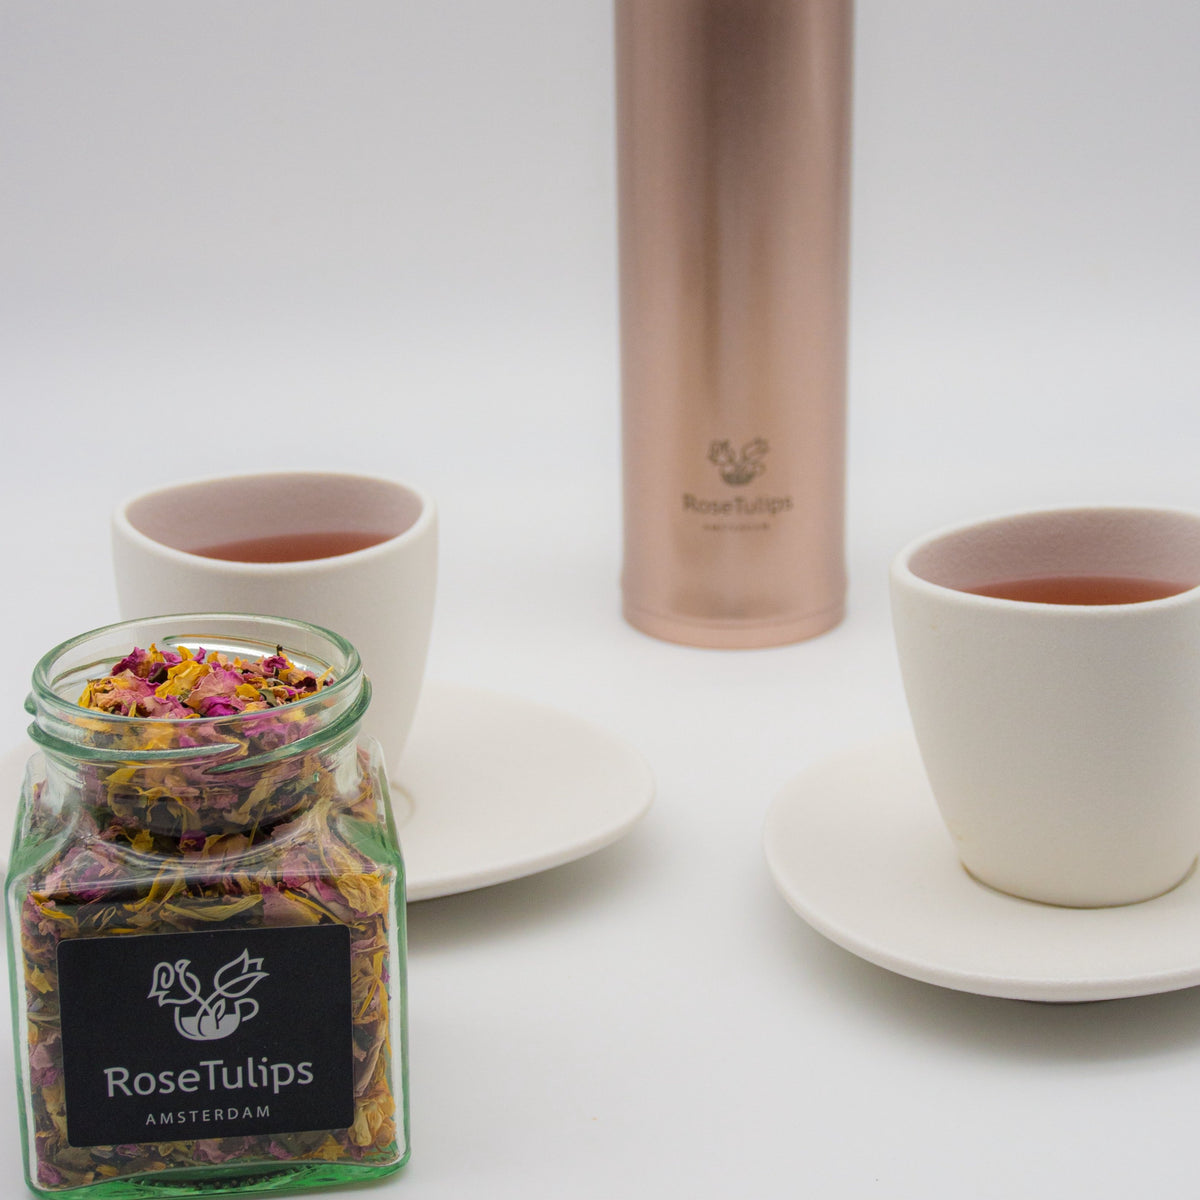 Keep your tea warm with Thermos ala Japanese style - Japan Today